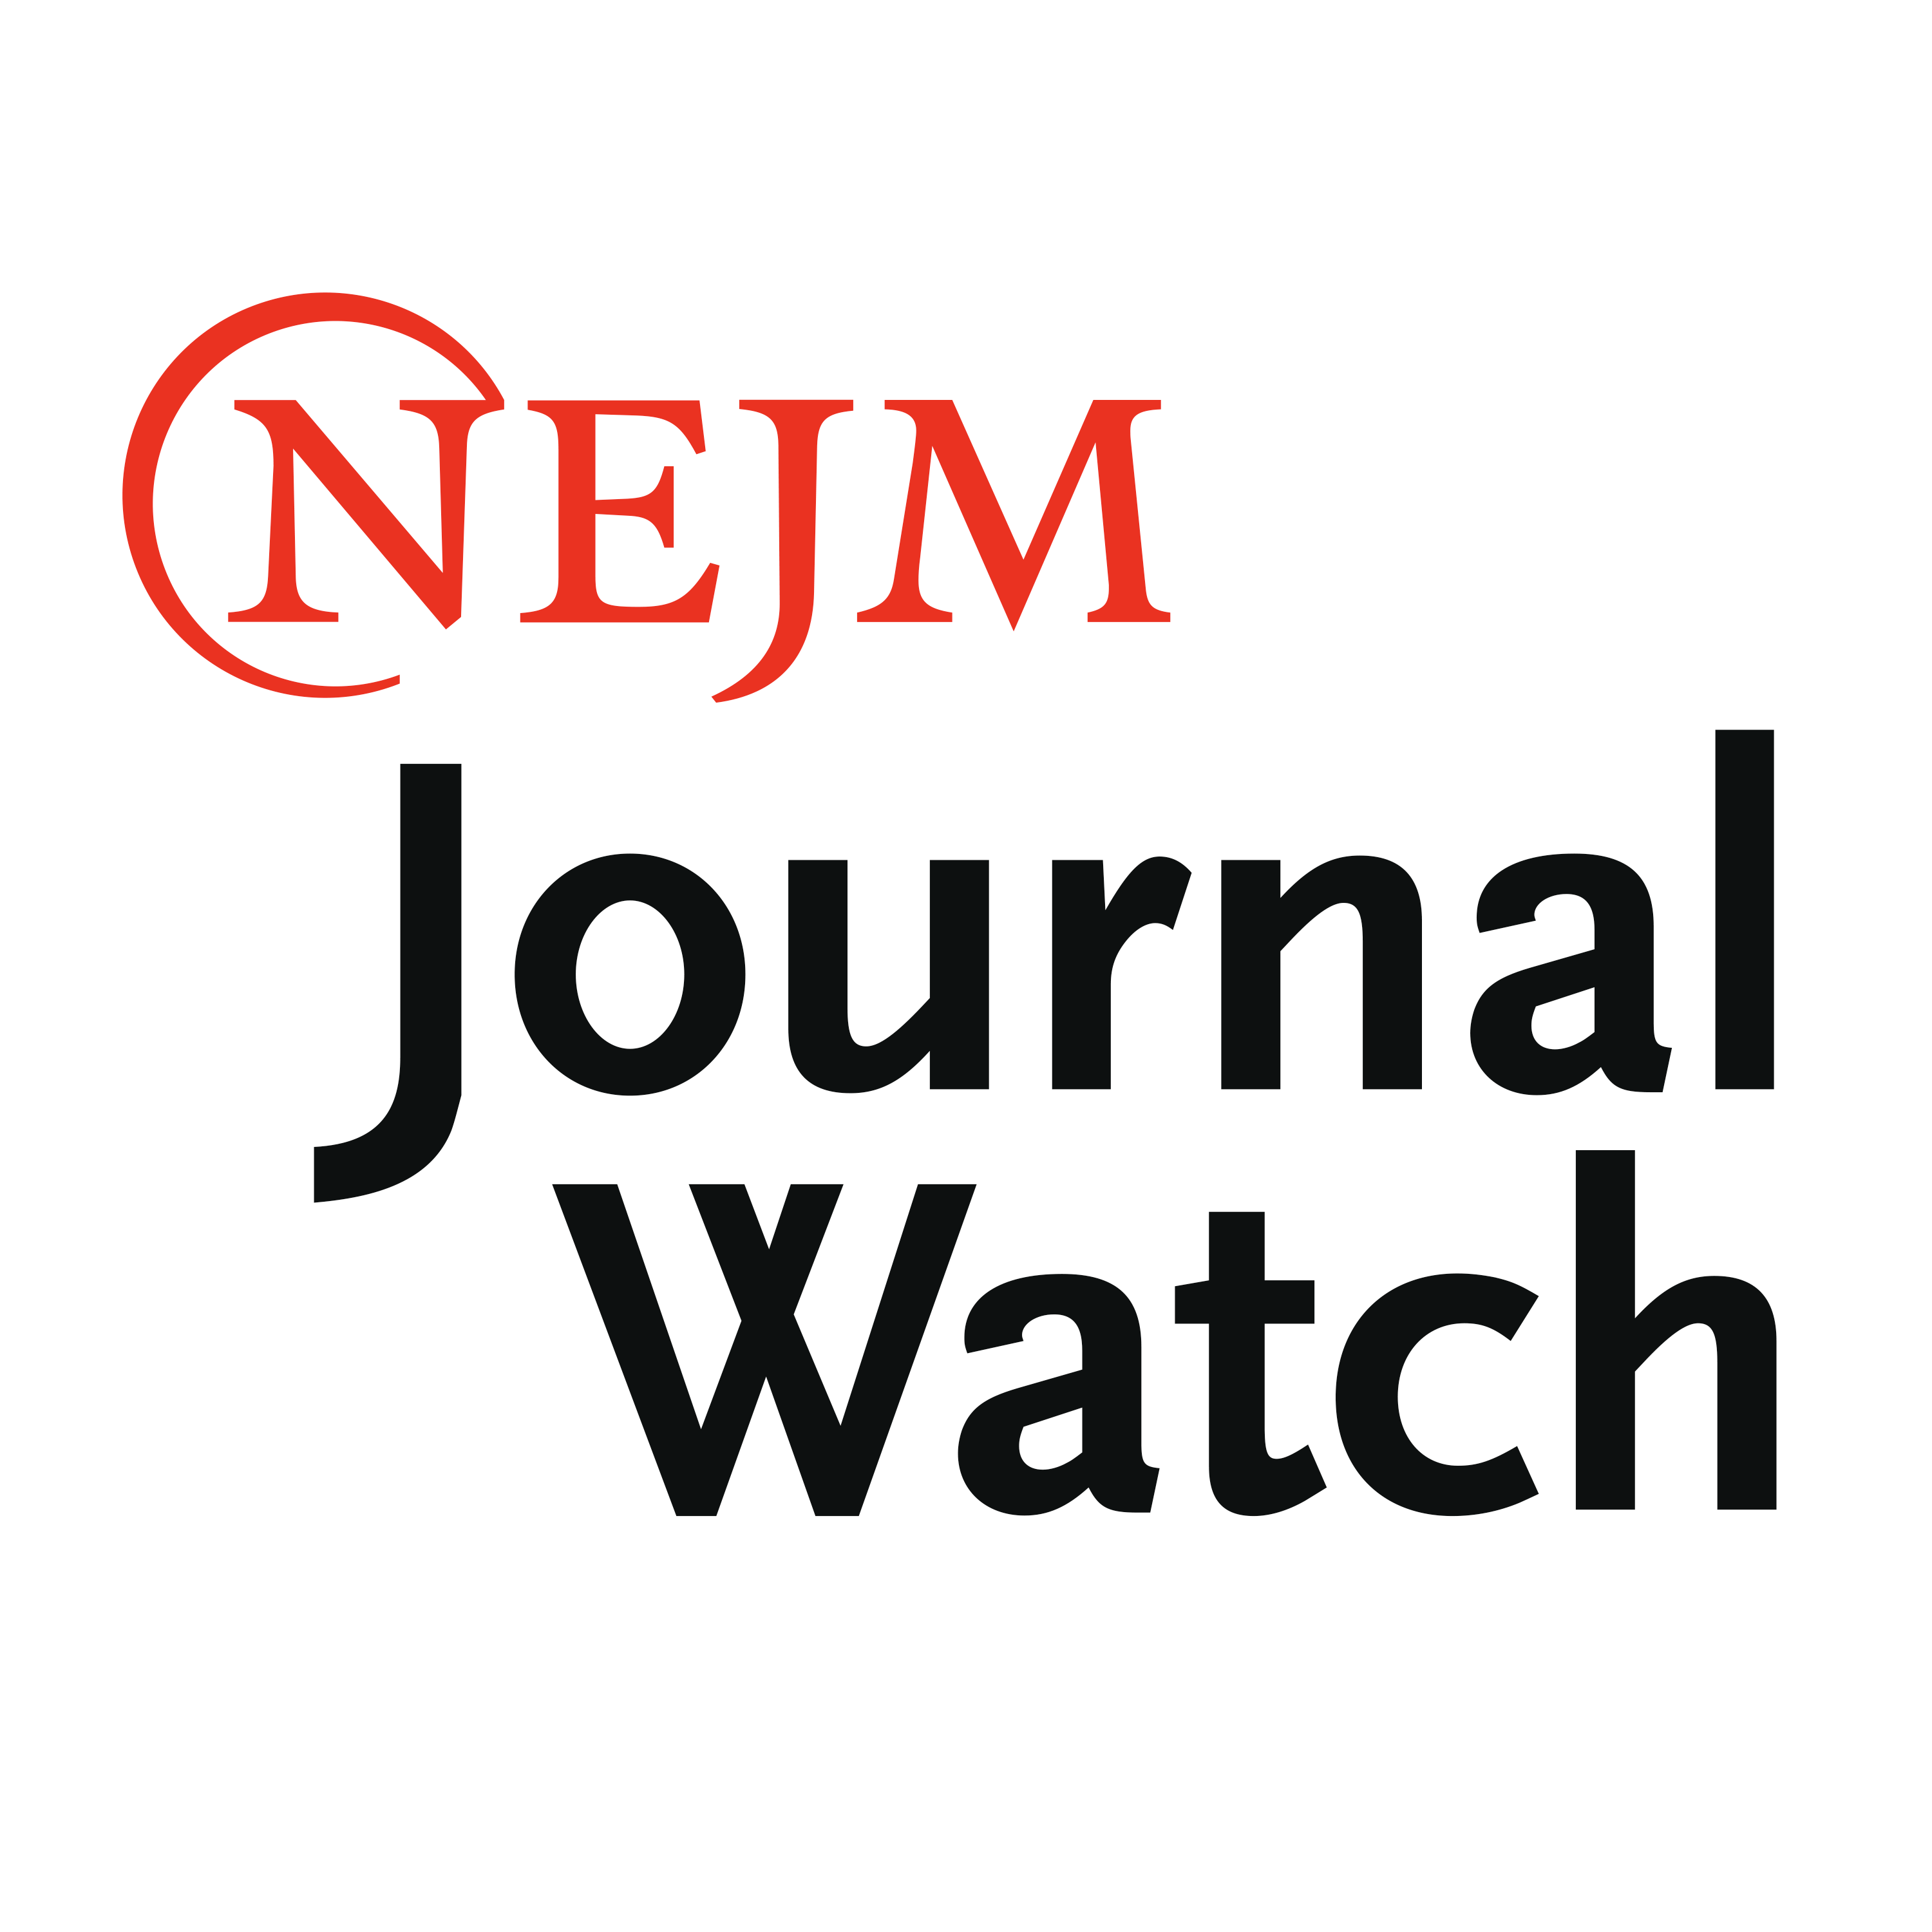 NEJM Group Reaches New Audiences Through Chinese 